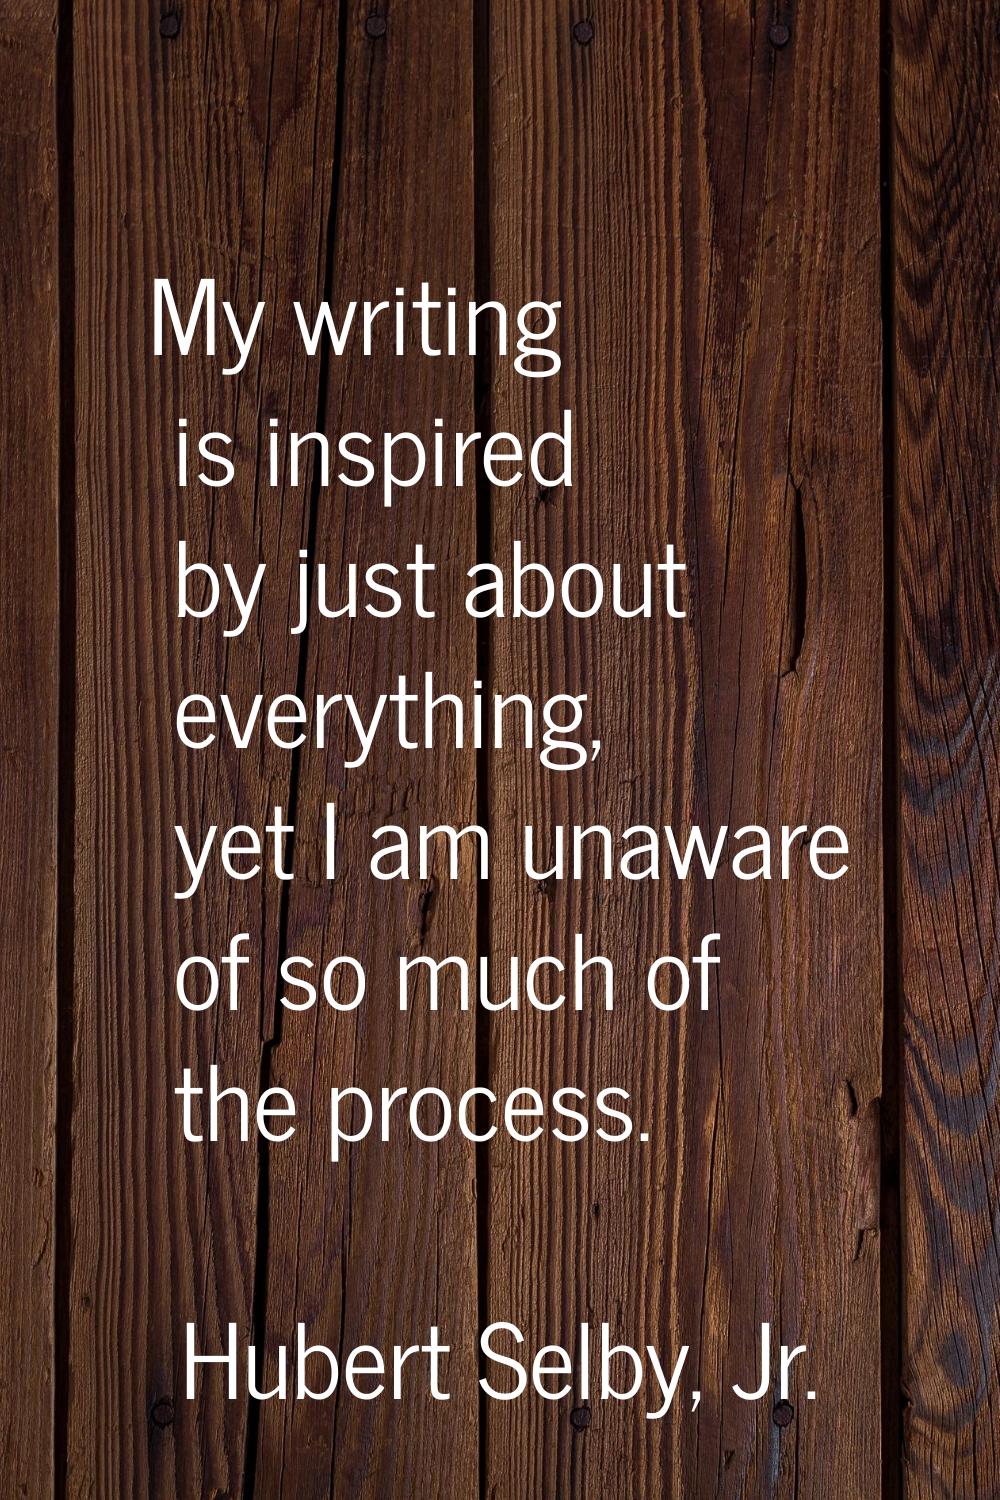 My writing is inspired by just about everything, yet I am unaware of so much of the process.